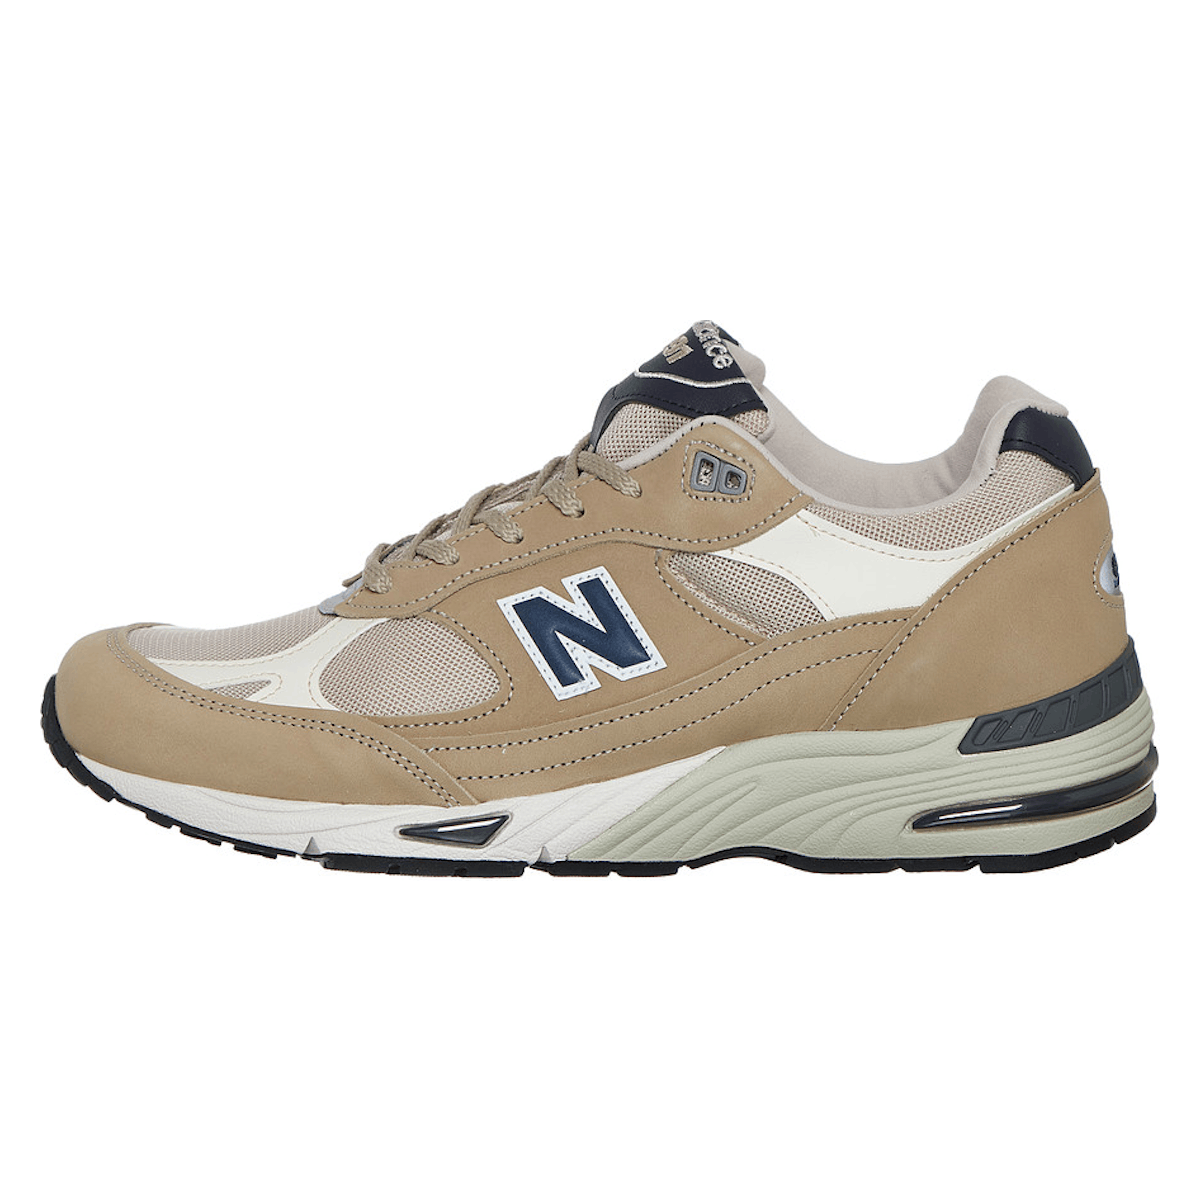 New Balance 991v1 Made in UK "Brown Rice"